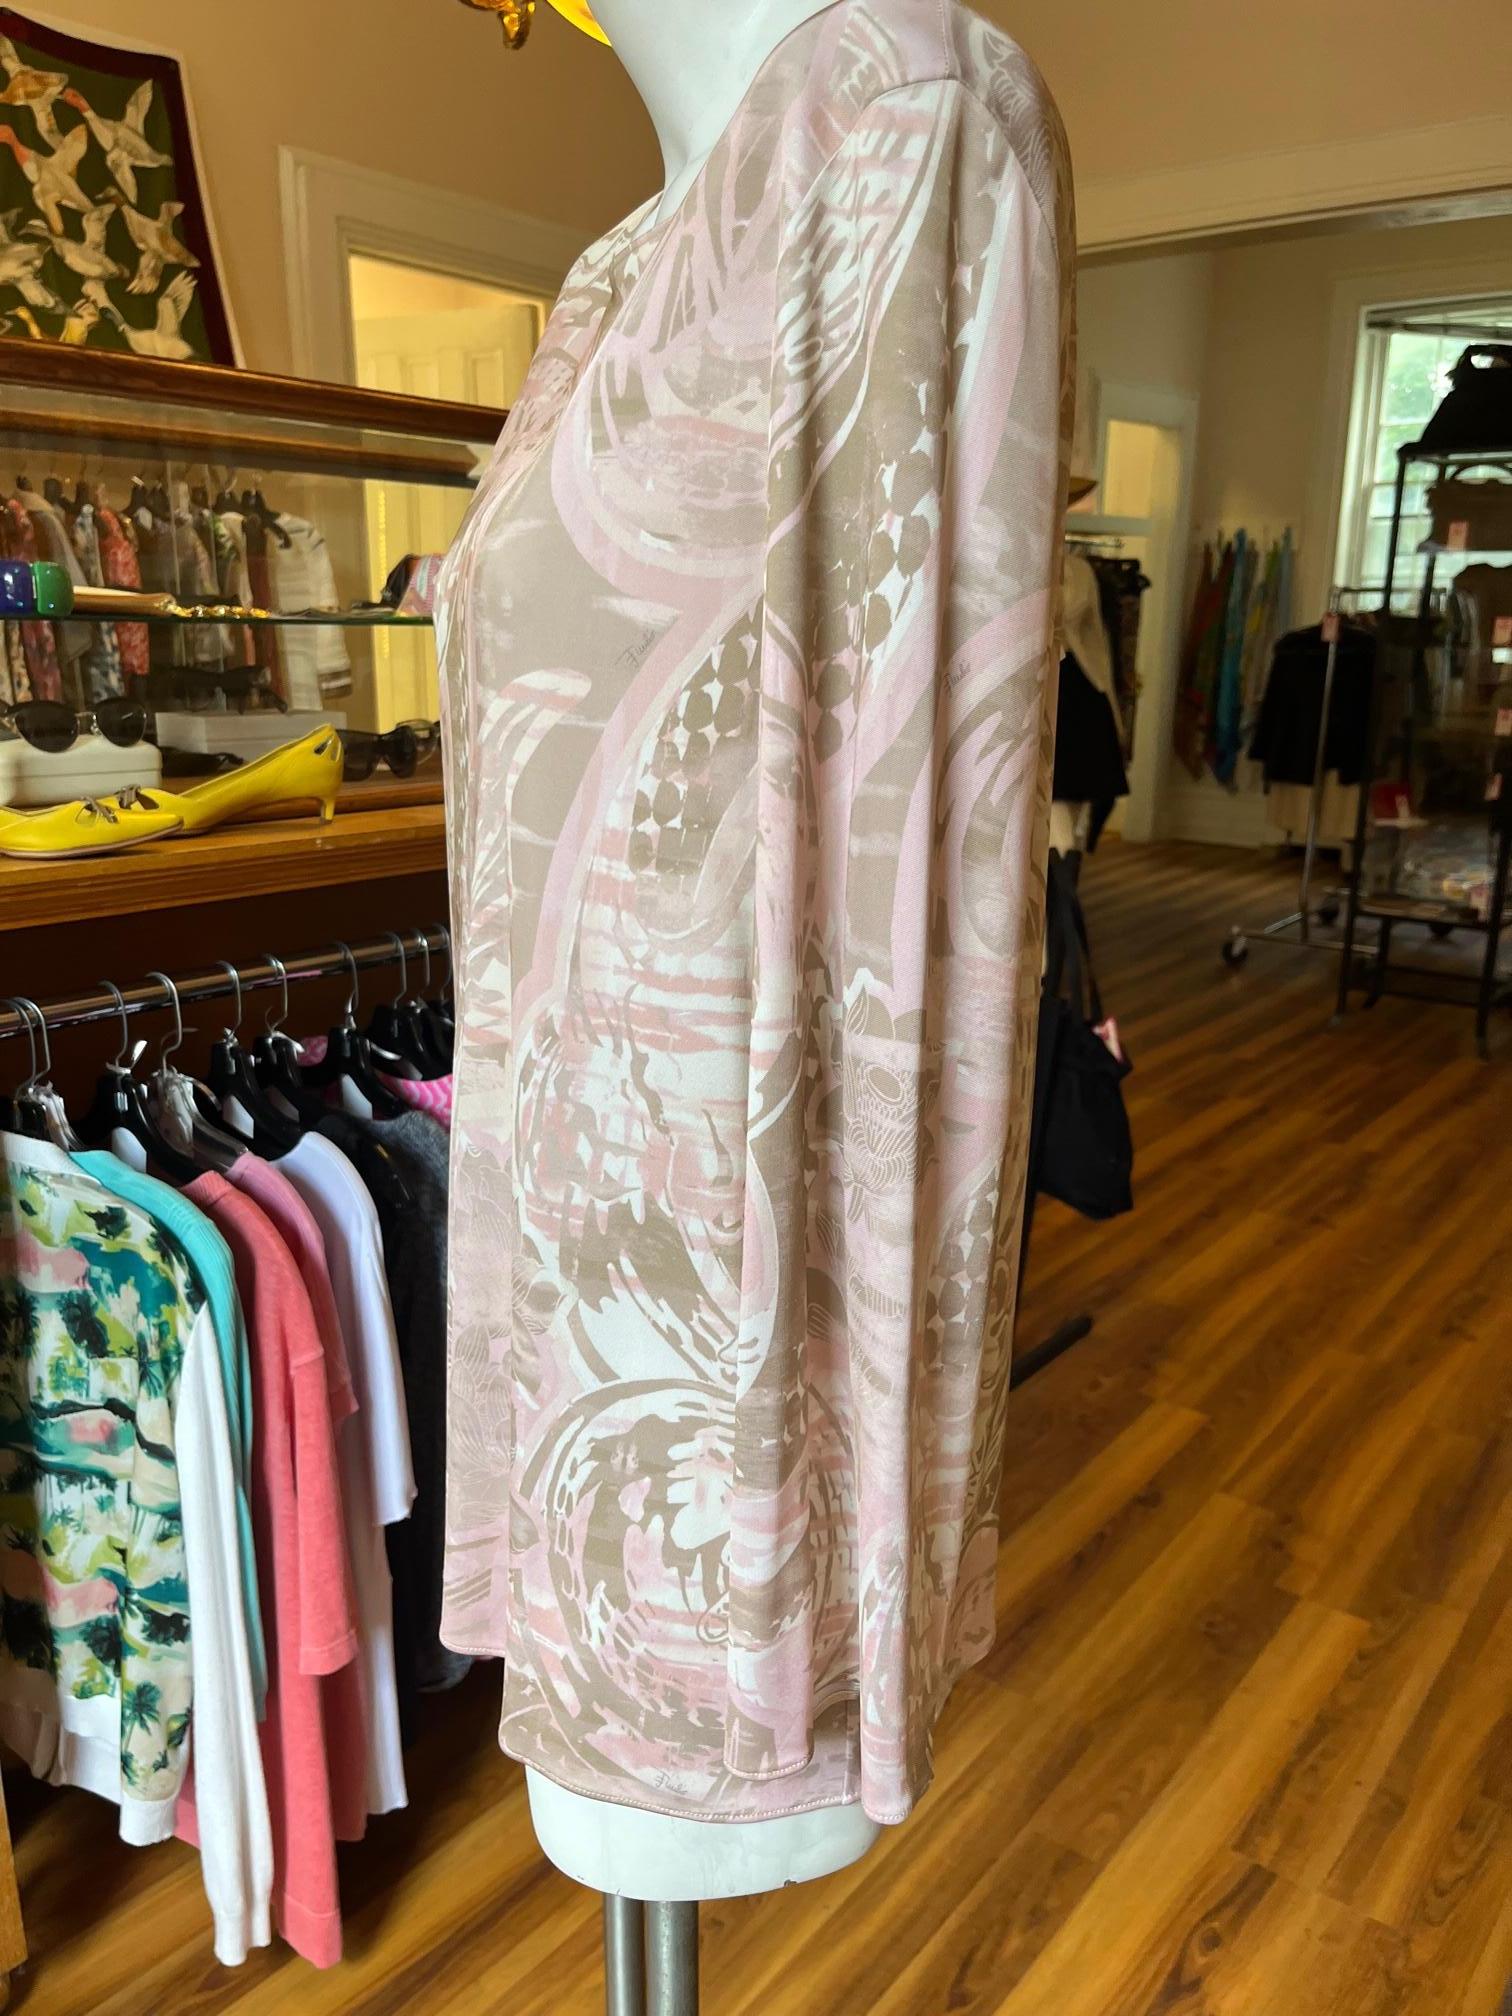 This is lovely Emilio Pucci new with tag tunic with very muted colors for Pucci. It has a round collar as well as long sleeves.
Emilio Pucci pieces tend to be bold and colorful, and this tunic is one of the exceptions.
The tunic is made in Italy of